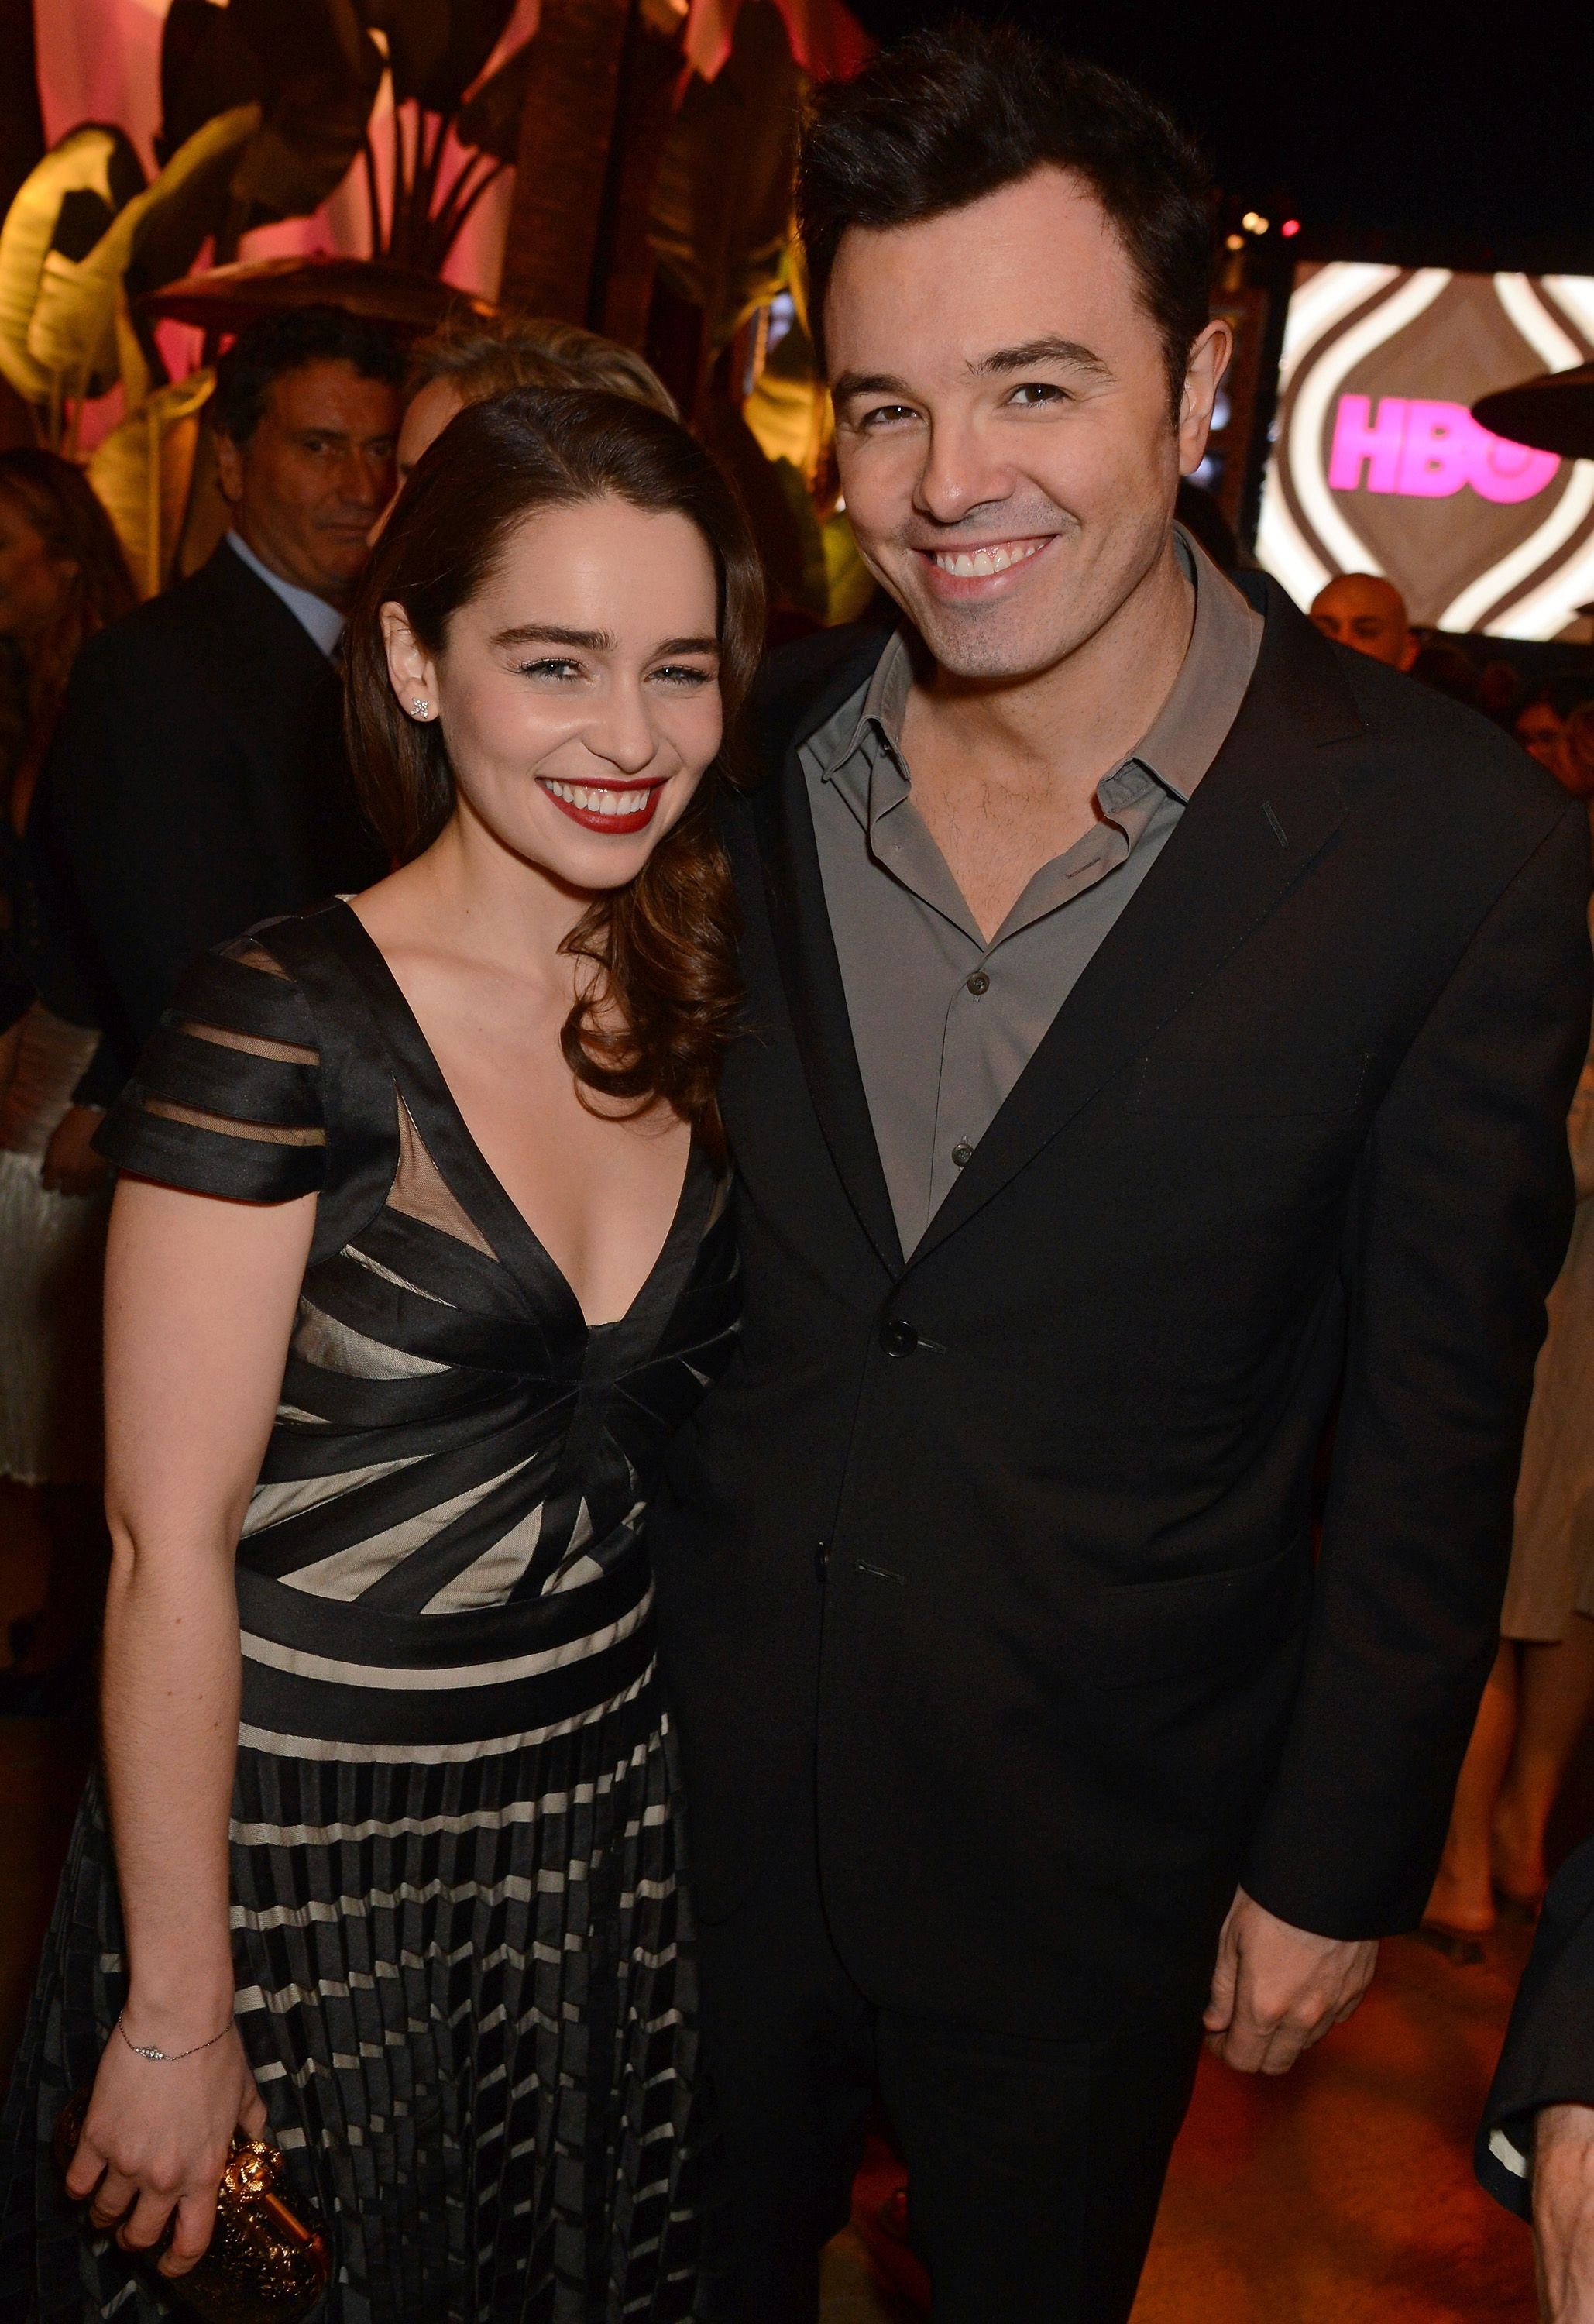 Emilia Clarke and Seth McFarlane during HBO's official Golden Globe Awards After-Party held at Circa 55 Restaurant at The Beverly Hilton Hotel on January 13, 2013 in Beverly Hills, California. | Source: Getty Images